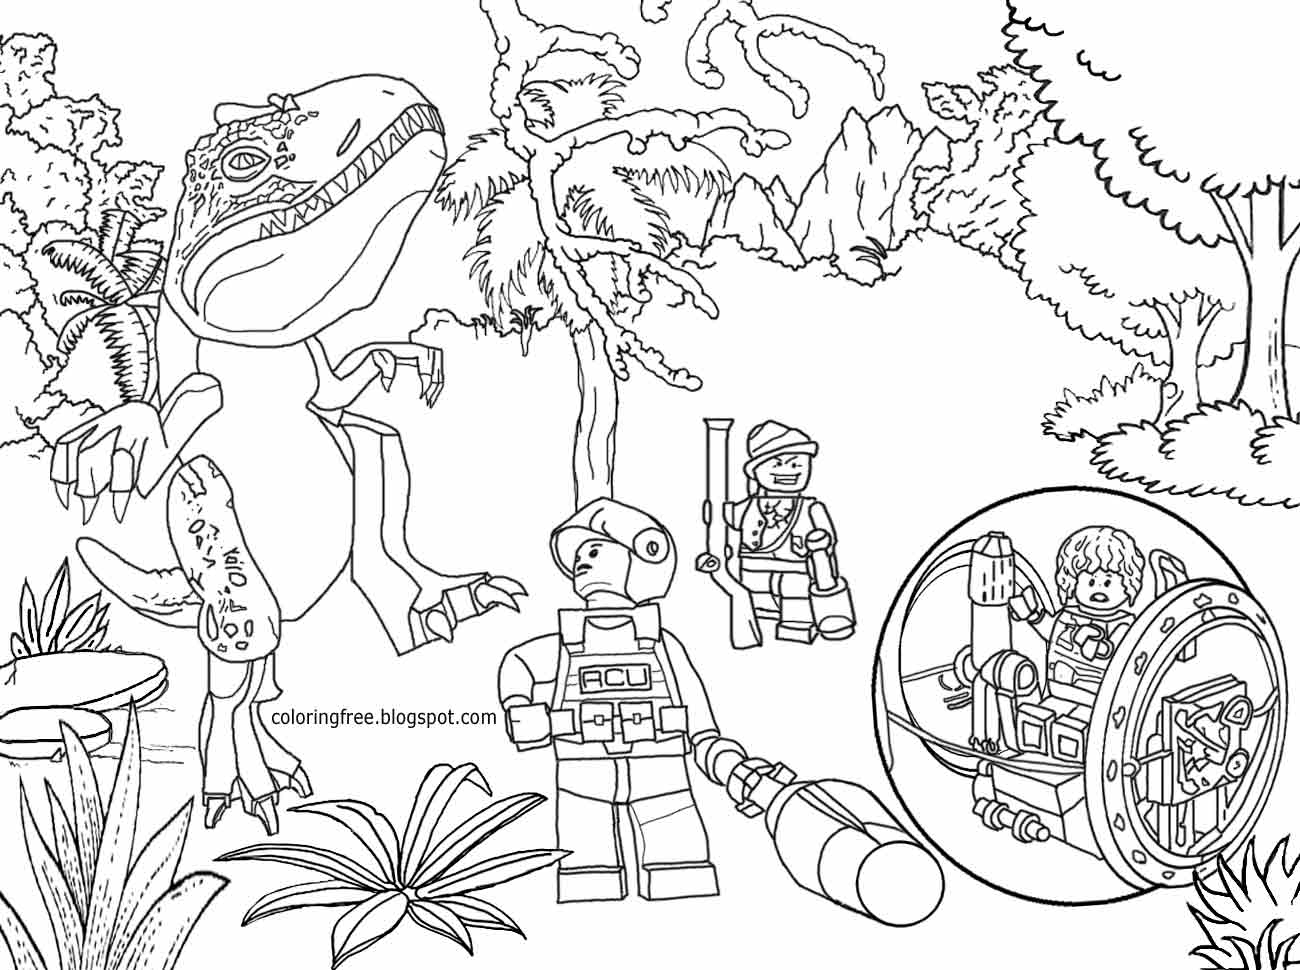 41 Sea Dinosaurs Coloring Pages  Images